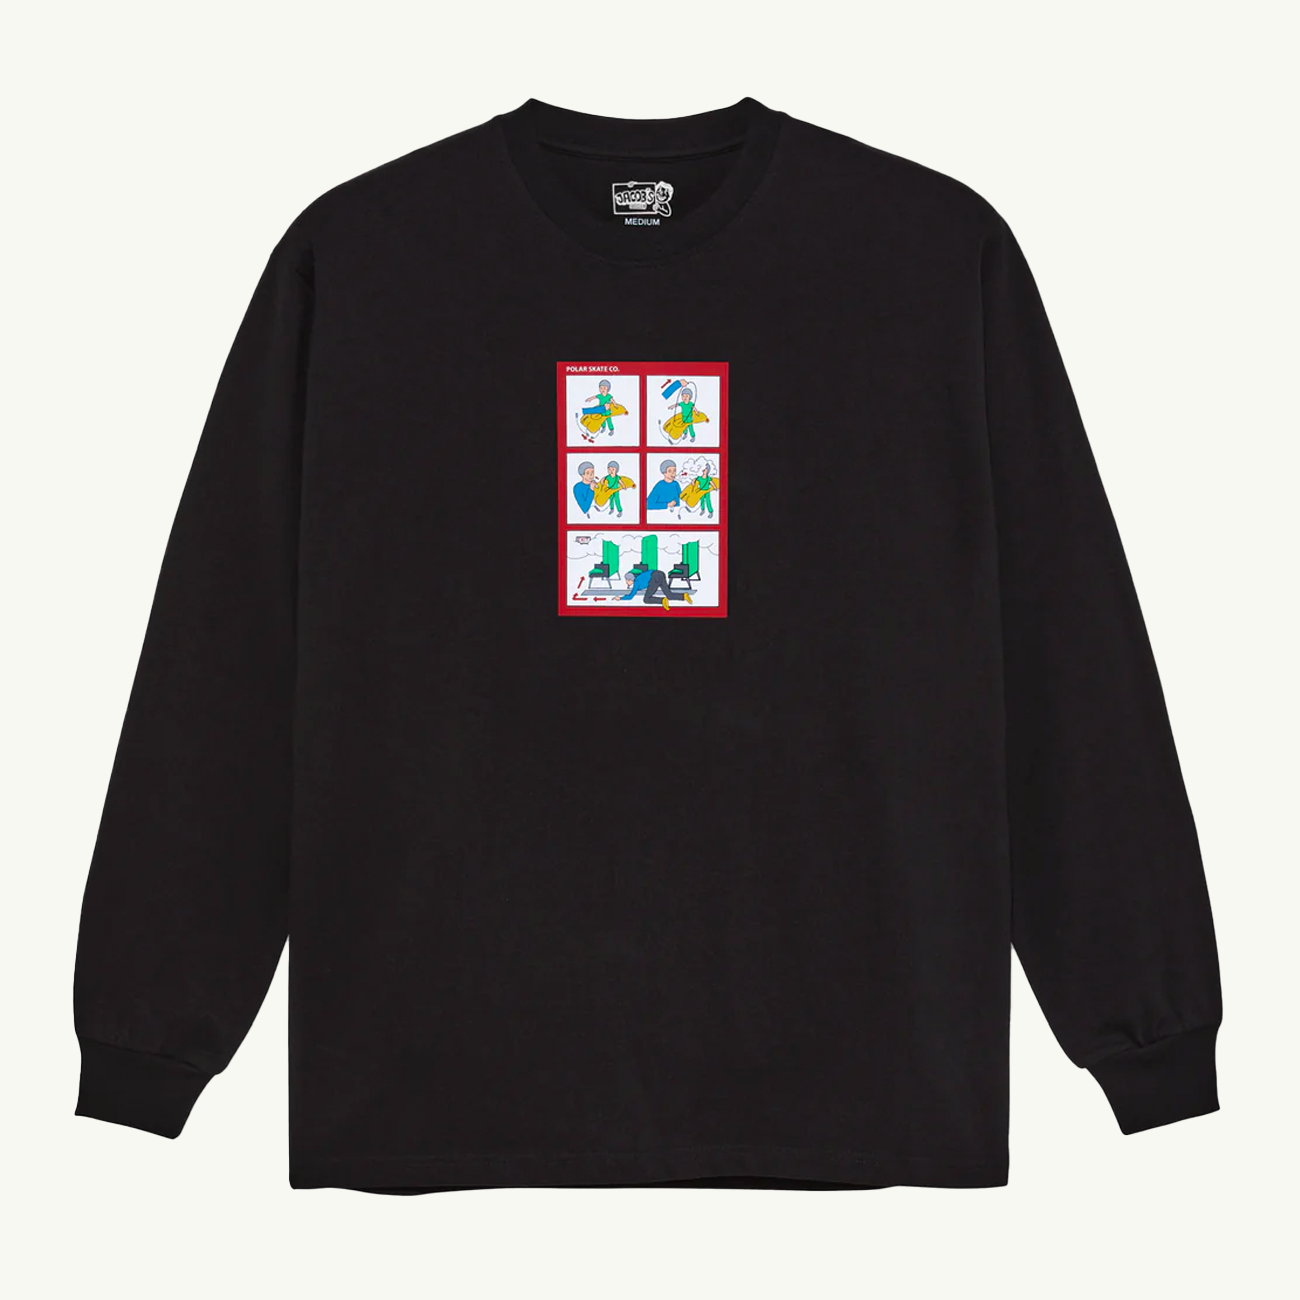 Safety On Board LS Tee - Black